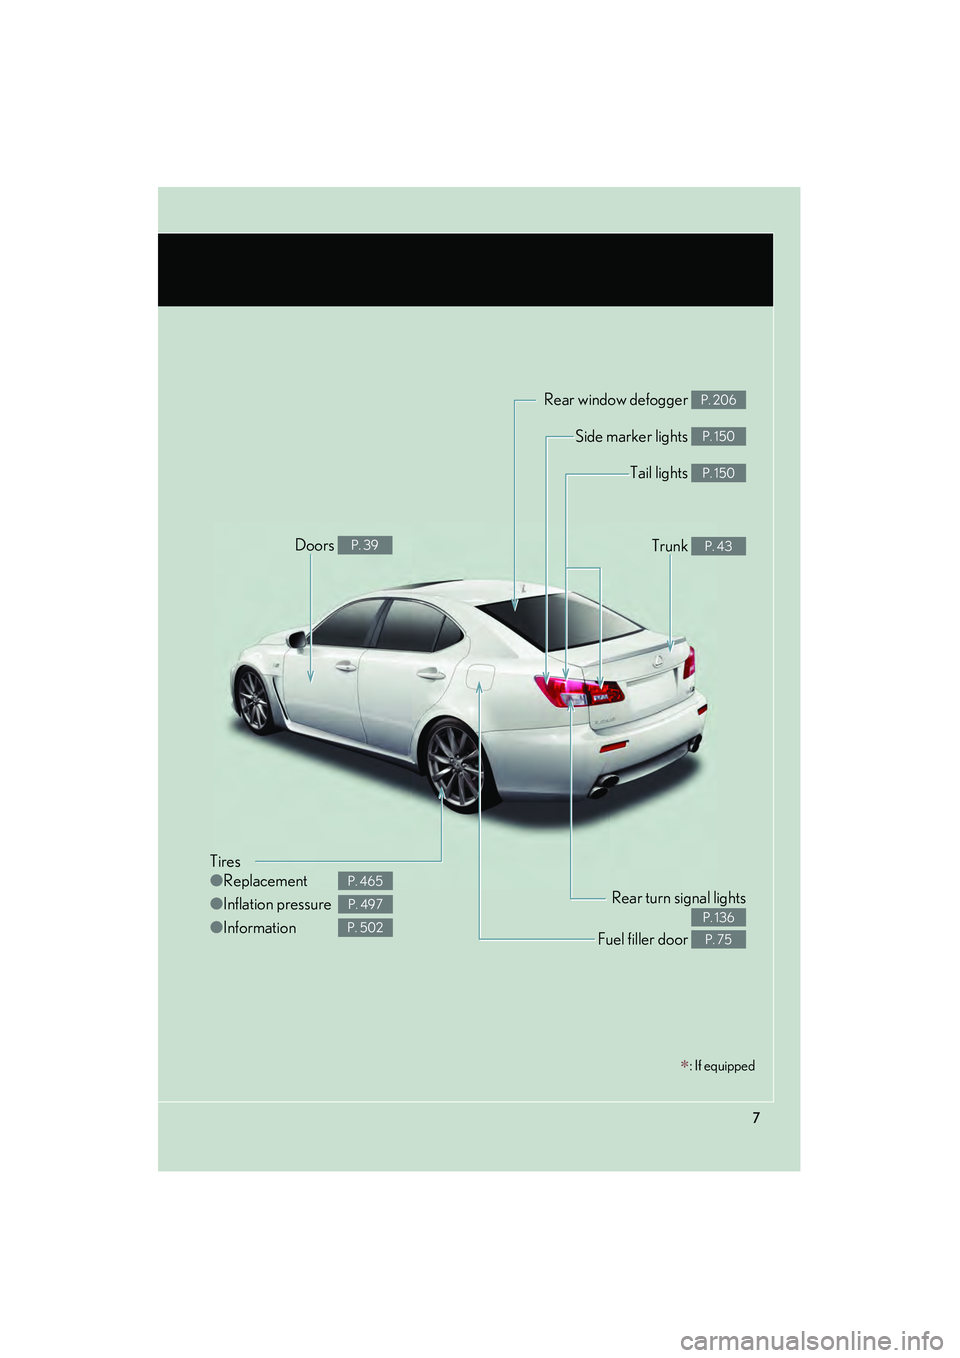 Lexus IS F 2010  Owners Manual 10_IS F_U
7
∗: If equipped
Tires
●Replacement
● Inflation pressure
● Information
P. 465
P. 497
P. 502
Tail lights P. 150
Side marker lights P. 150
Trunk P. 43
Rear window defogger P. 206
Doors